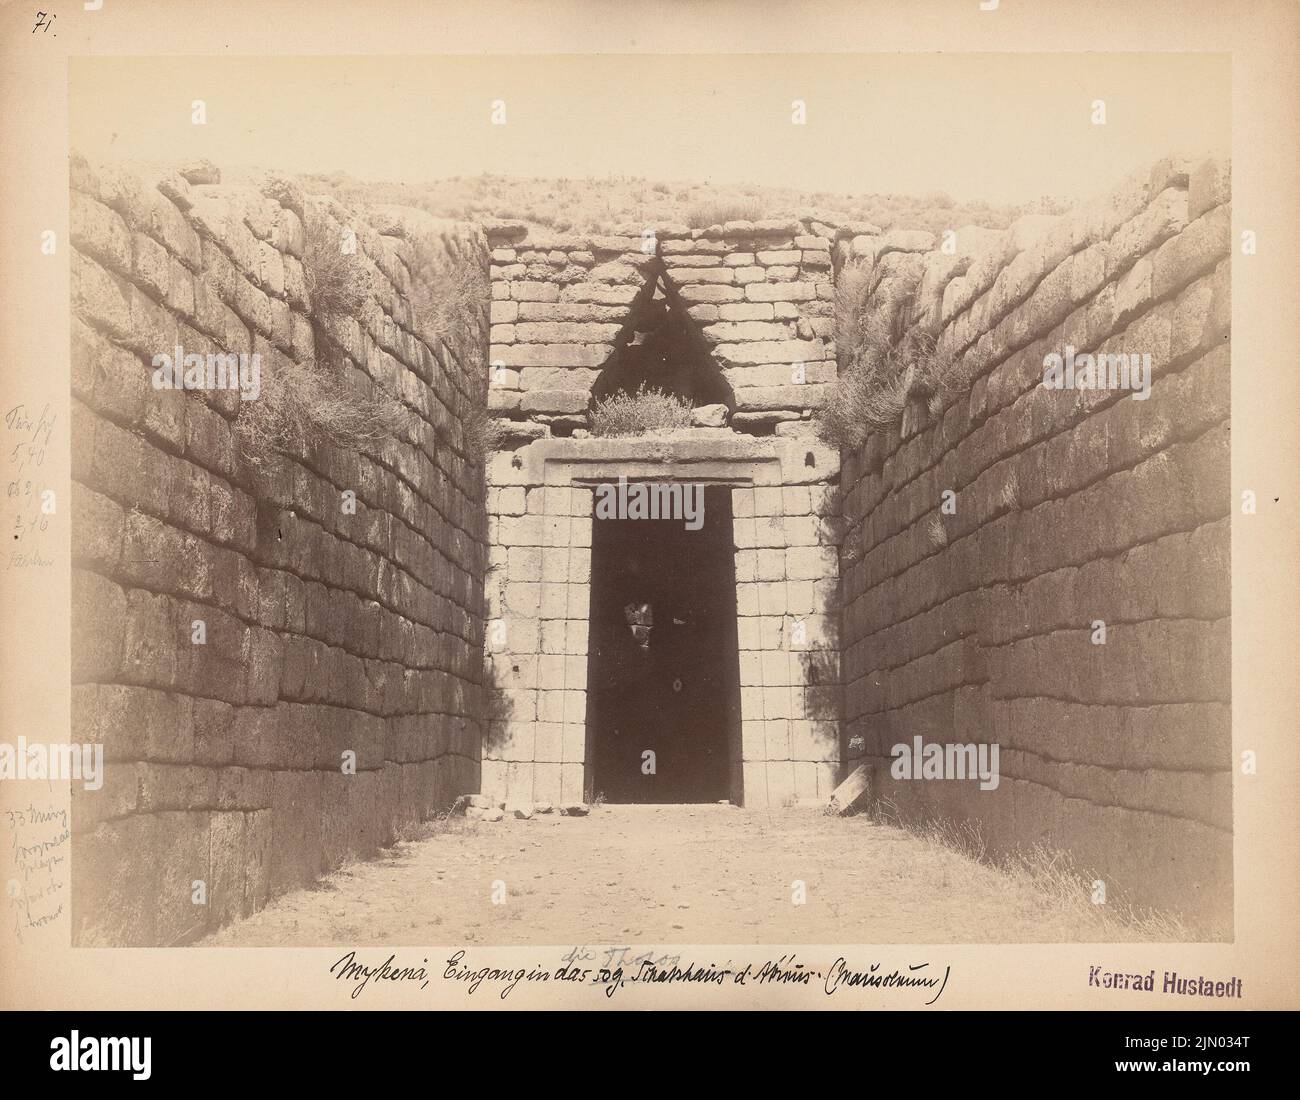 Unknown photographer, Tholos (treasure house, grave) of the ATREUS in Mycenae (without dat.): Entrance to the cone grave. Photo on cardboard, 23.2 x 29.9 cm (including scan edges) unbek. Fotograf : Tholos (Schatzhaus, Grab) des Atreus, Mykene Stock Photo